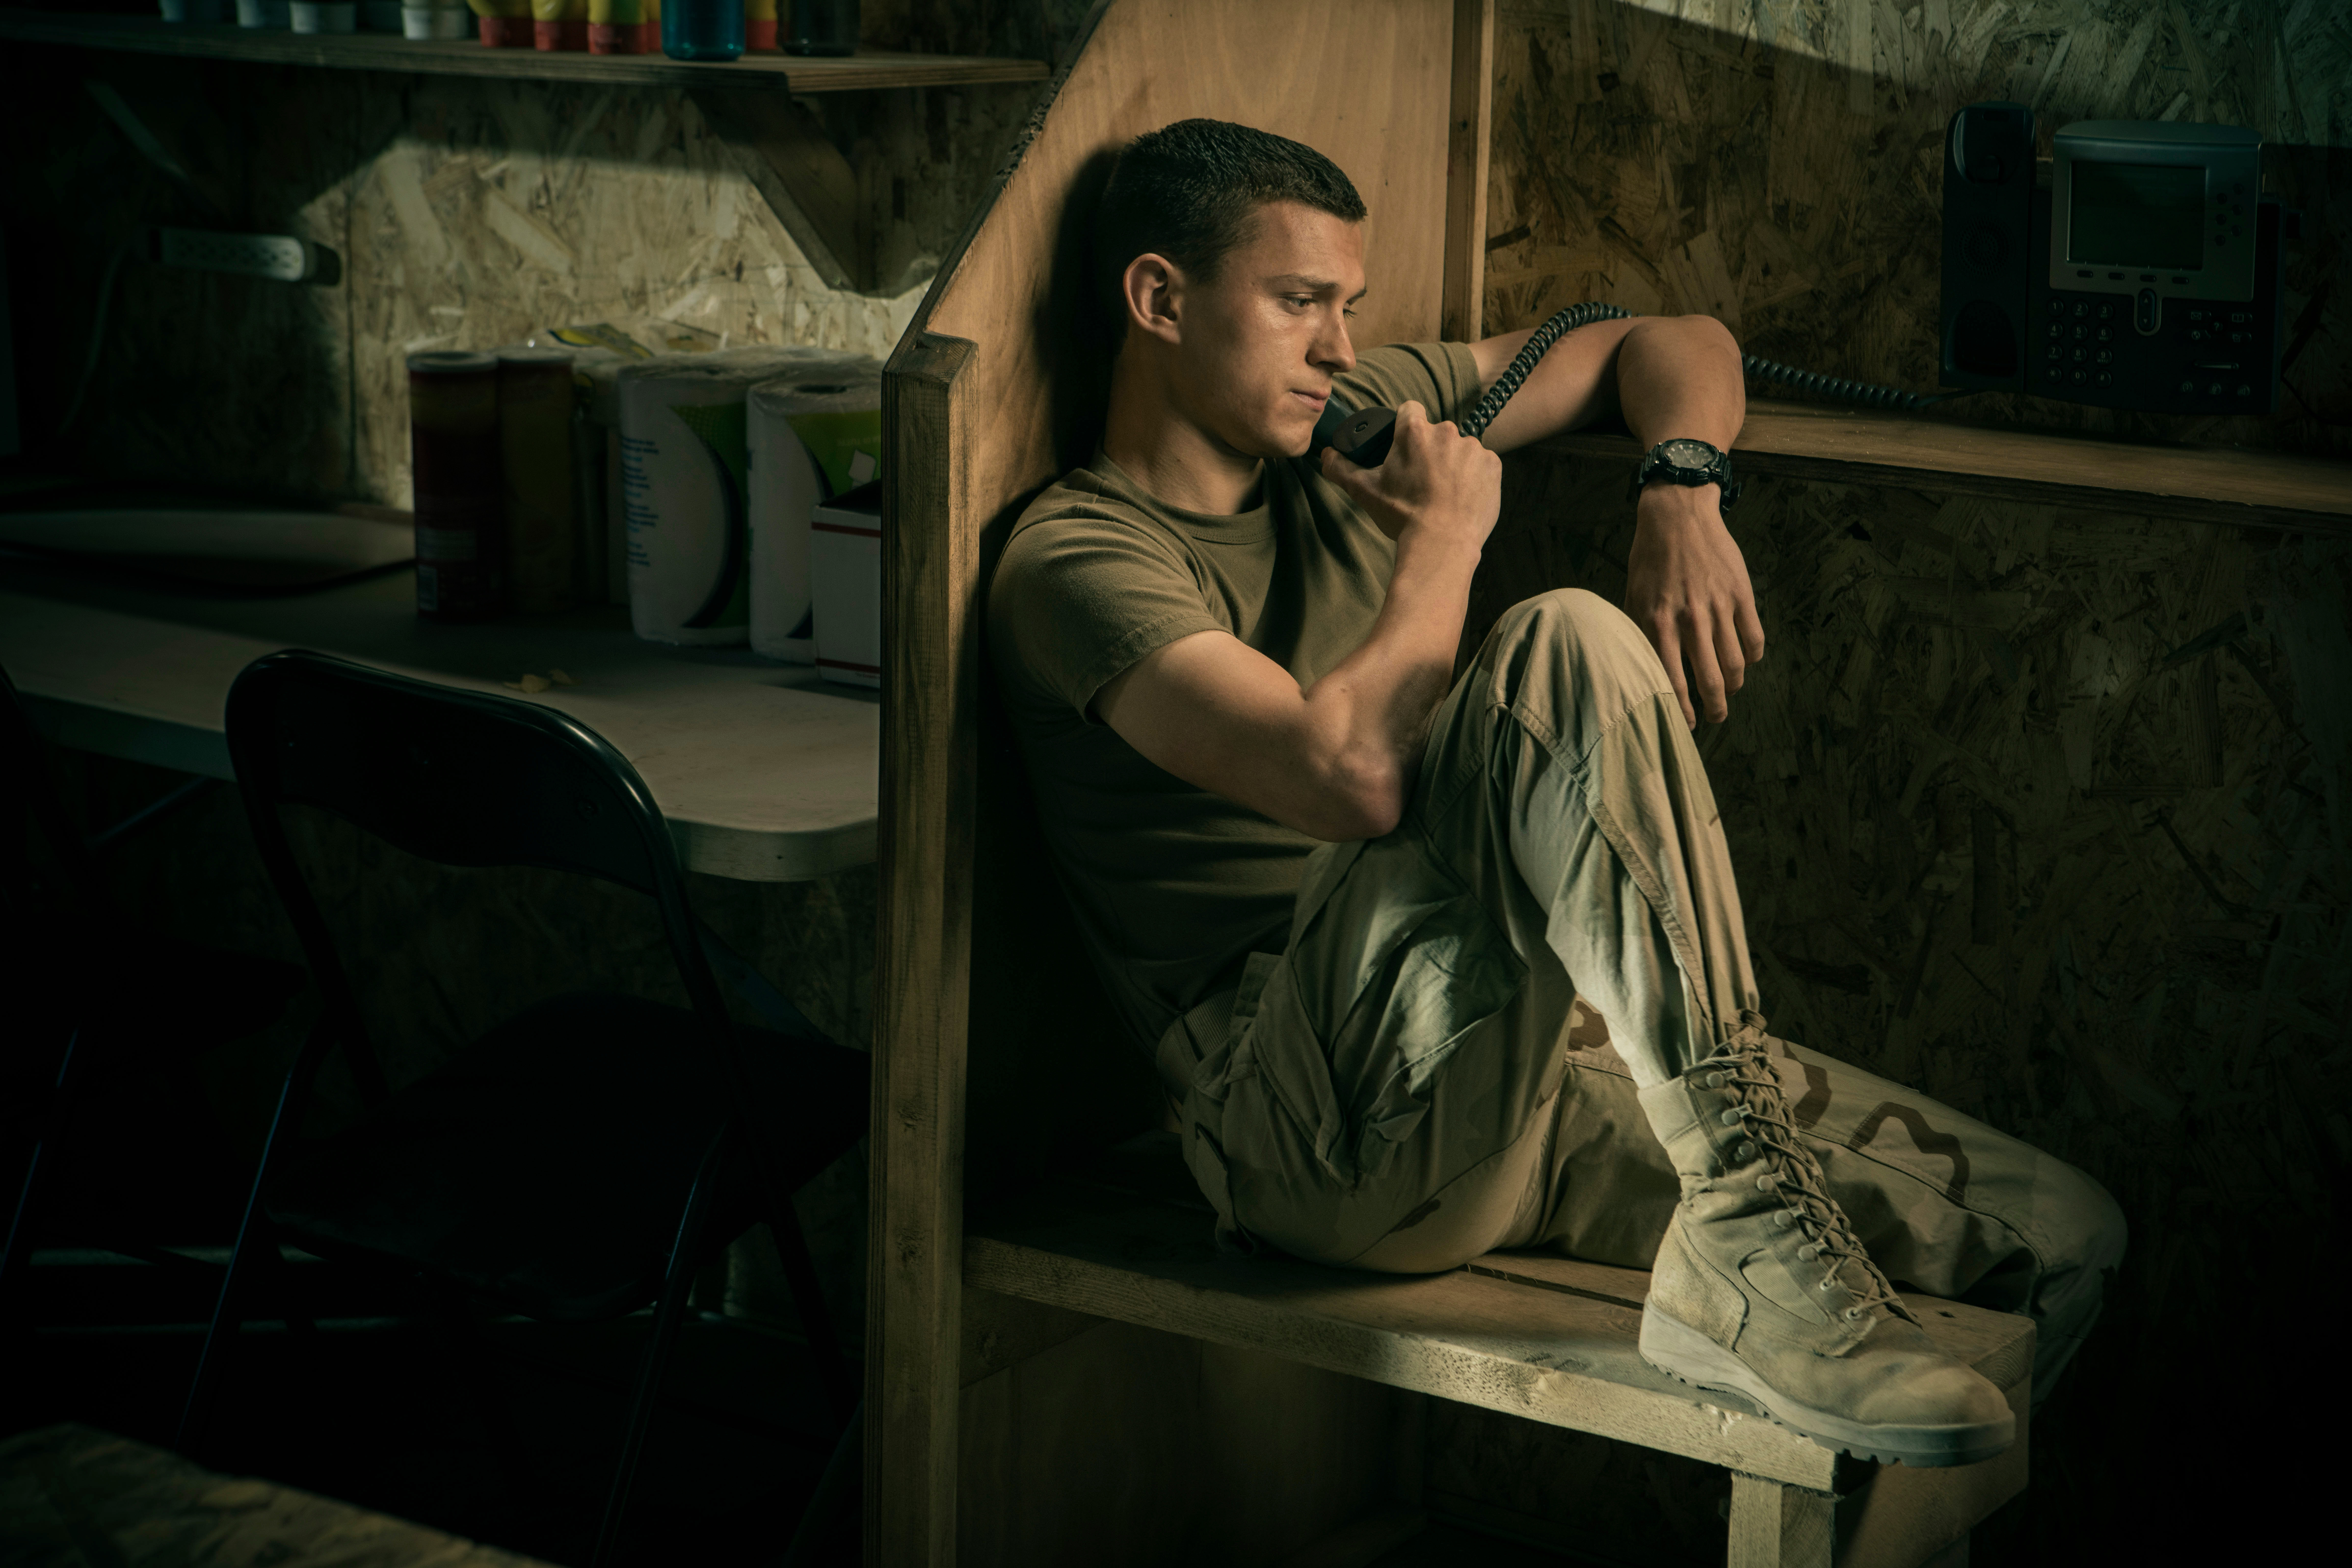 Actor Tom Holland calls home from a phone center in Iraq in a scene from "Cherry." (Apple TV+ via AP)